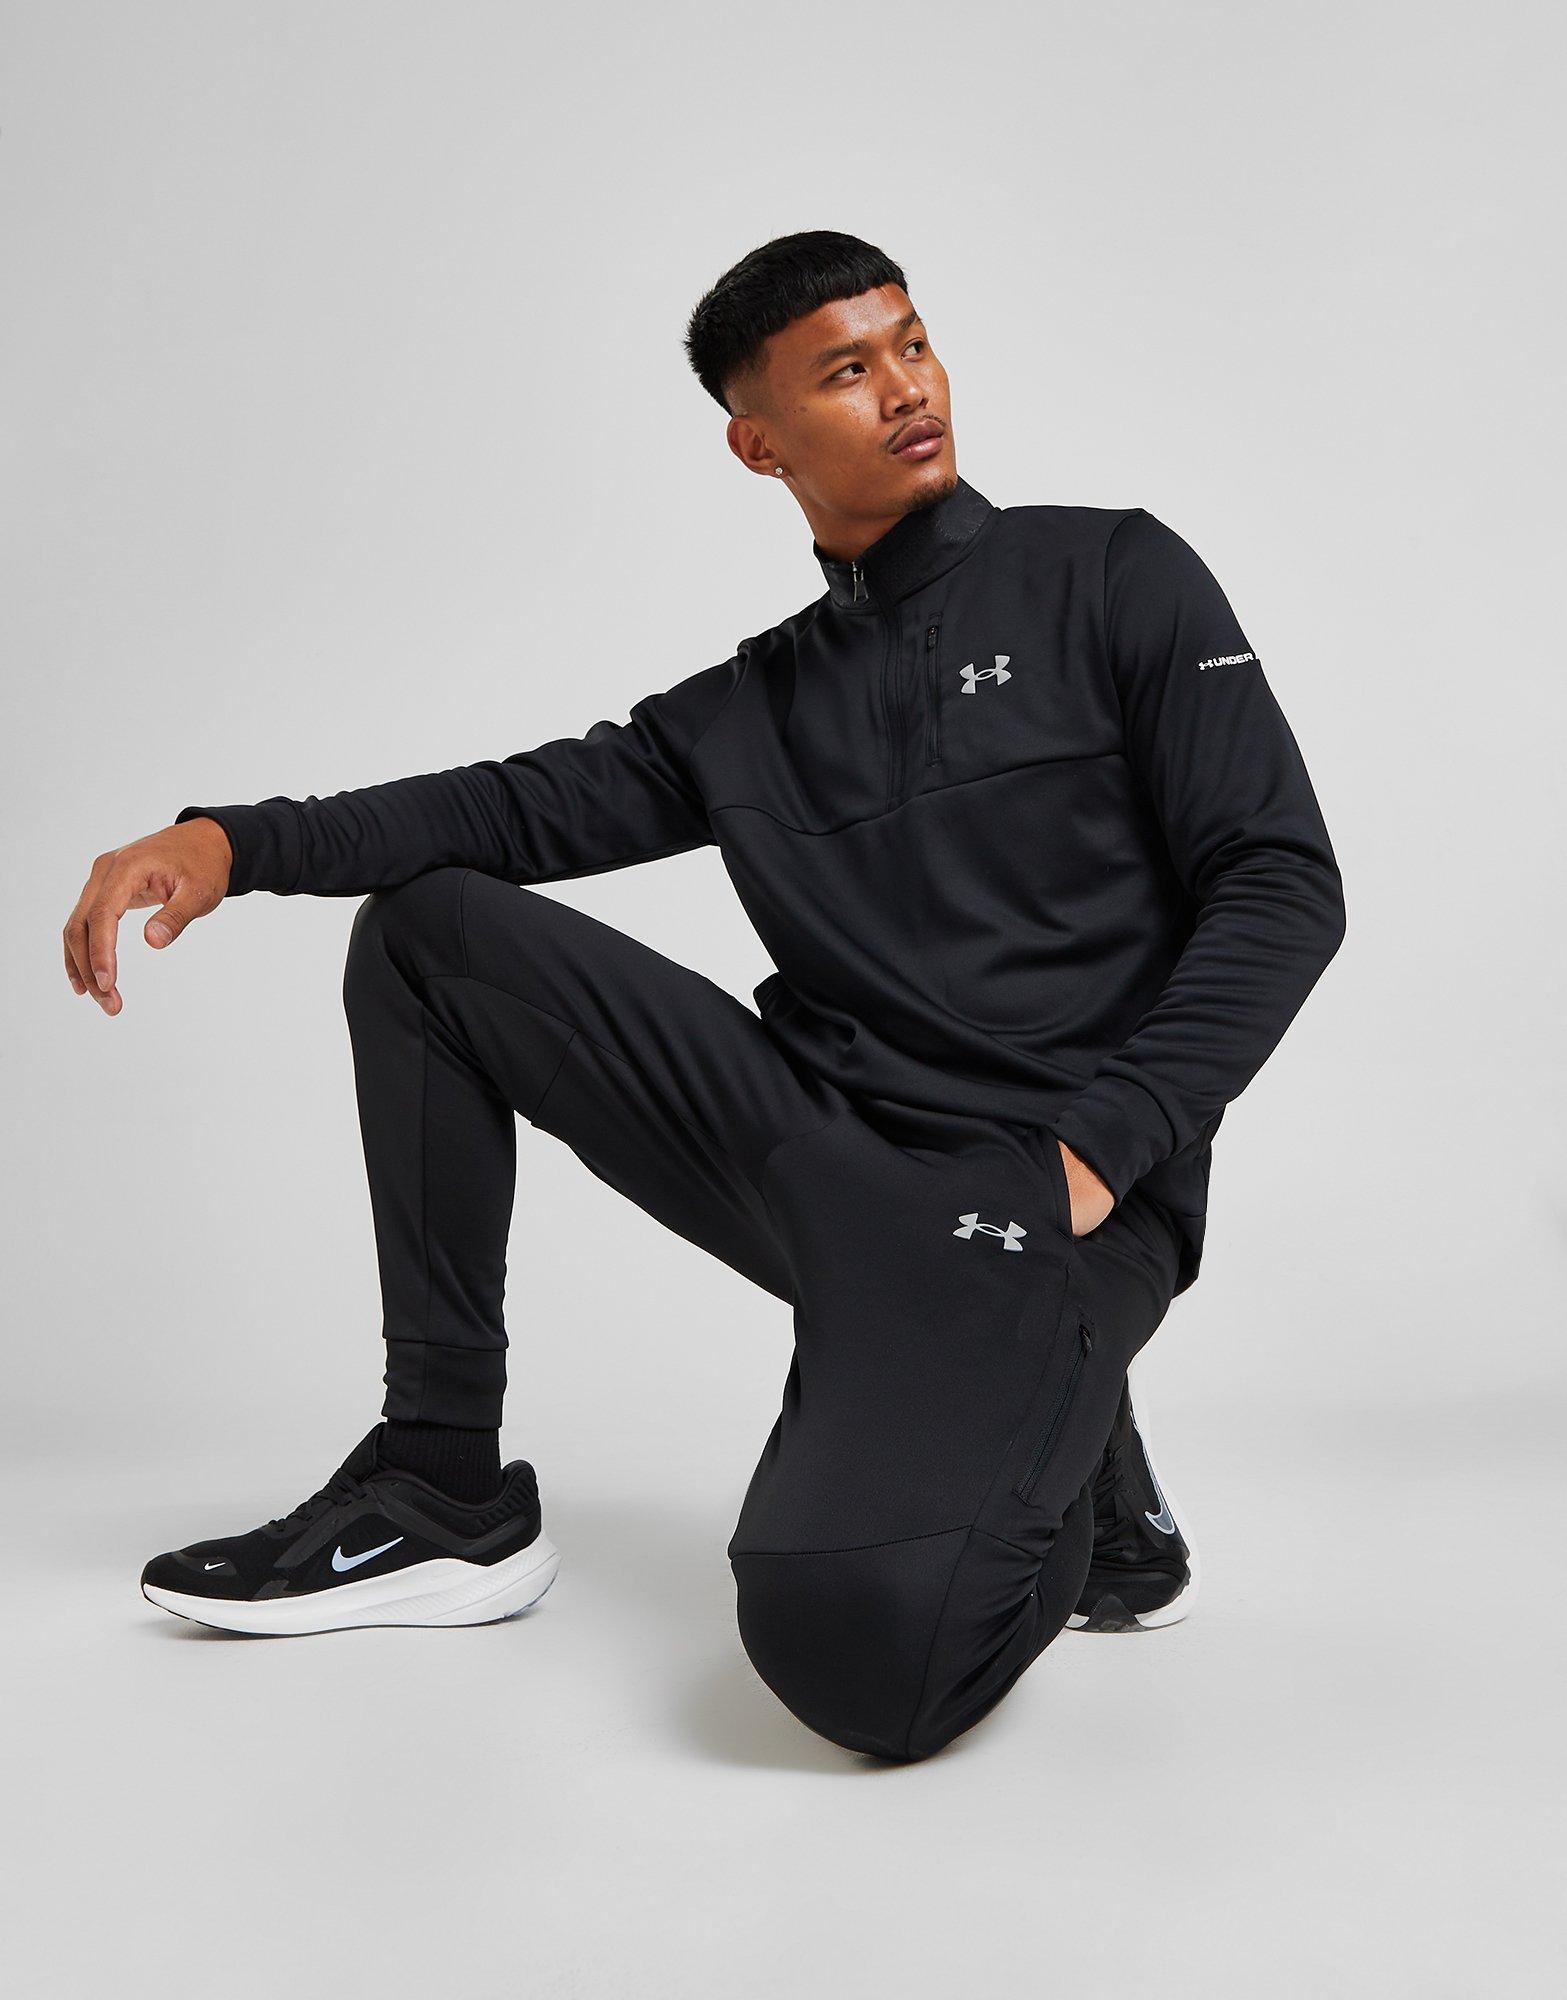  Under Armour UA Recover Track XS Black : Baby